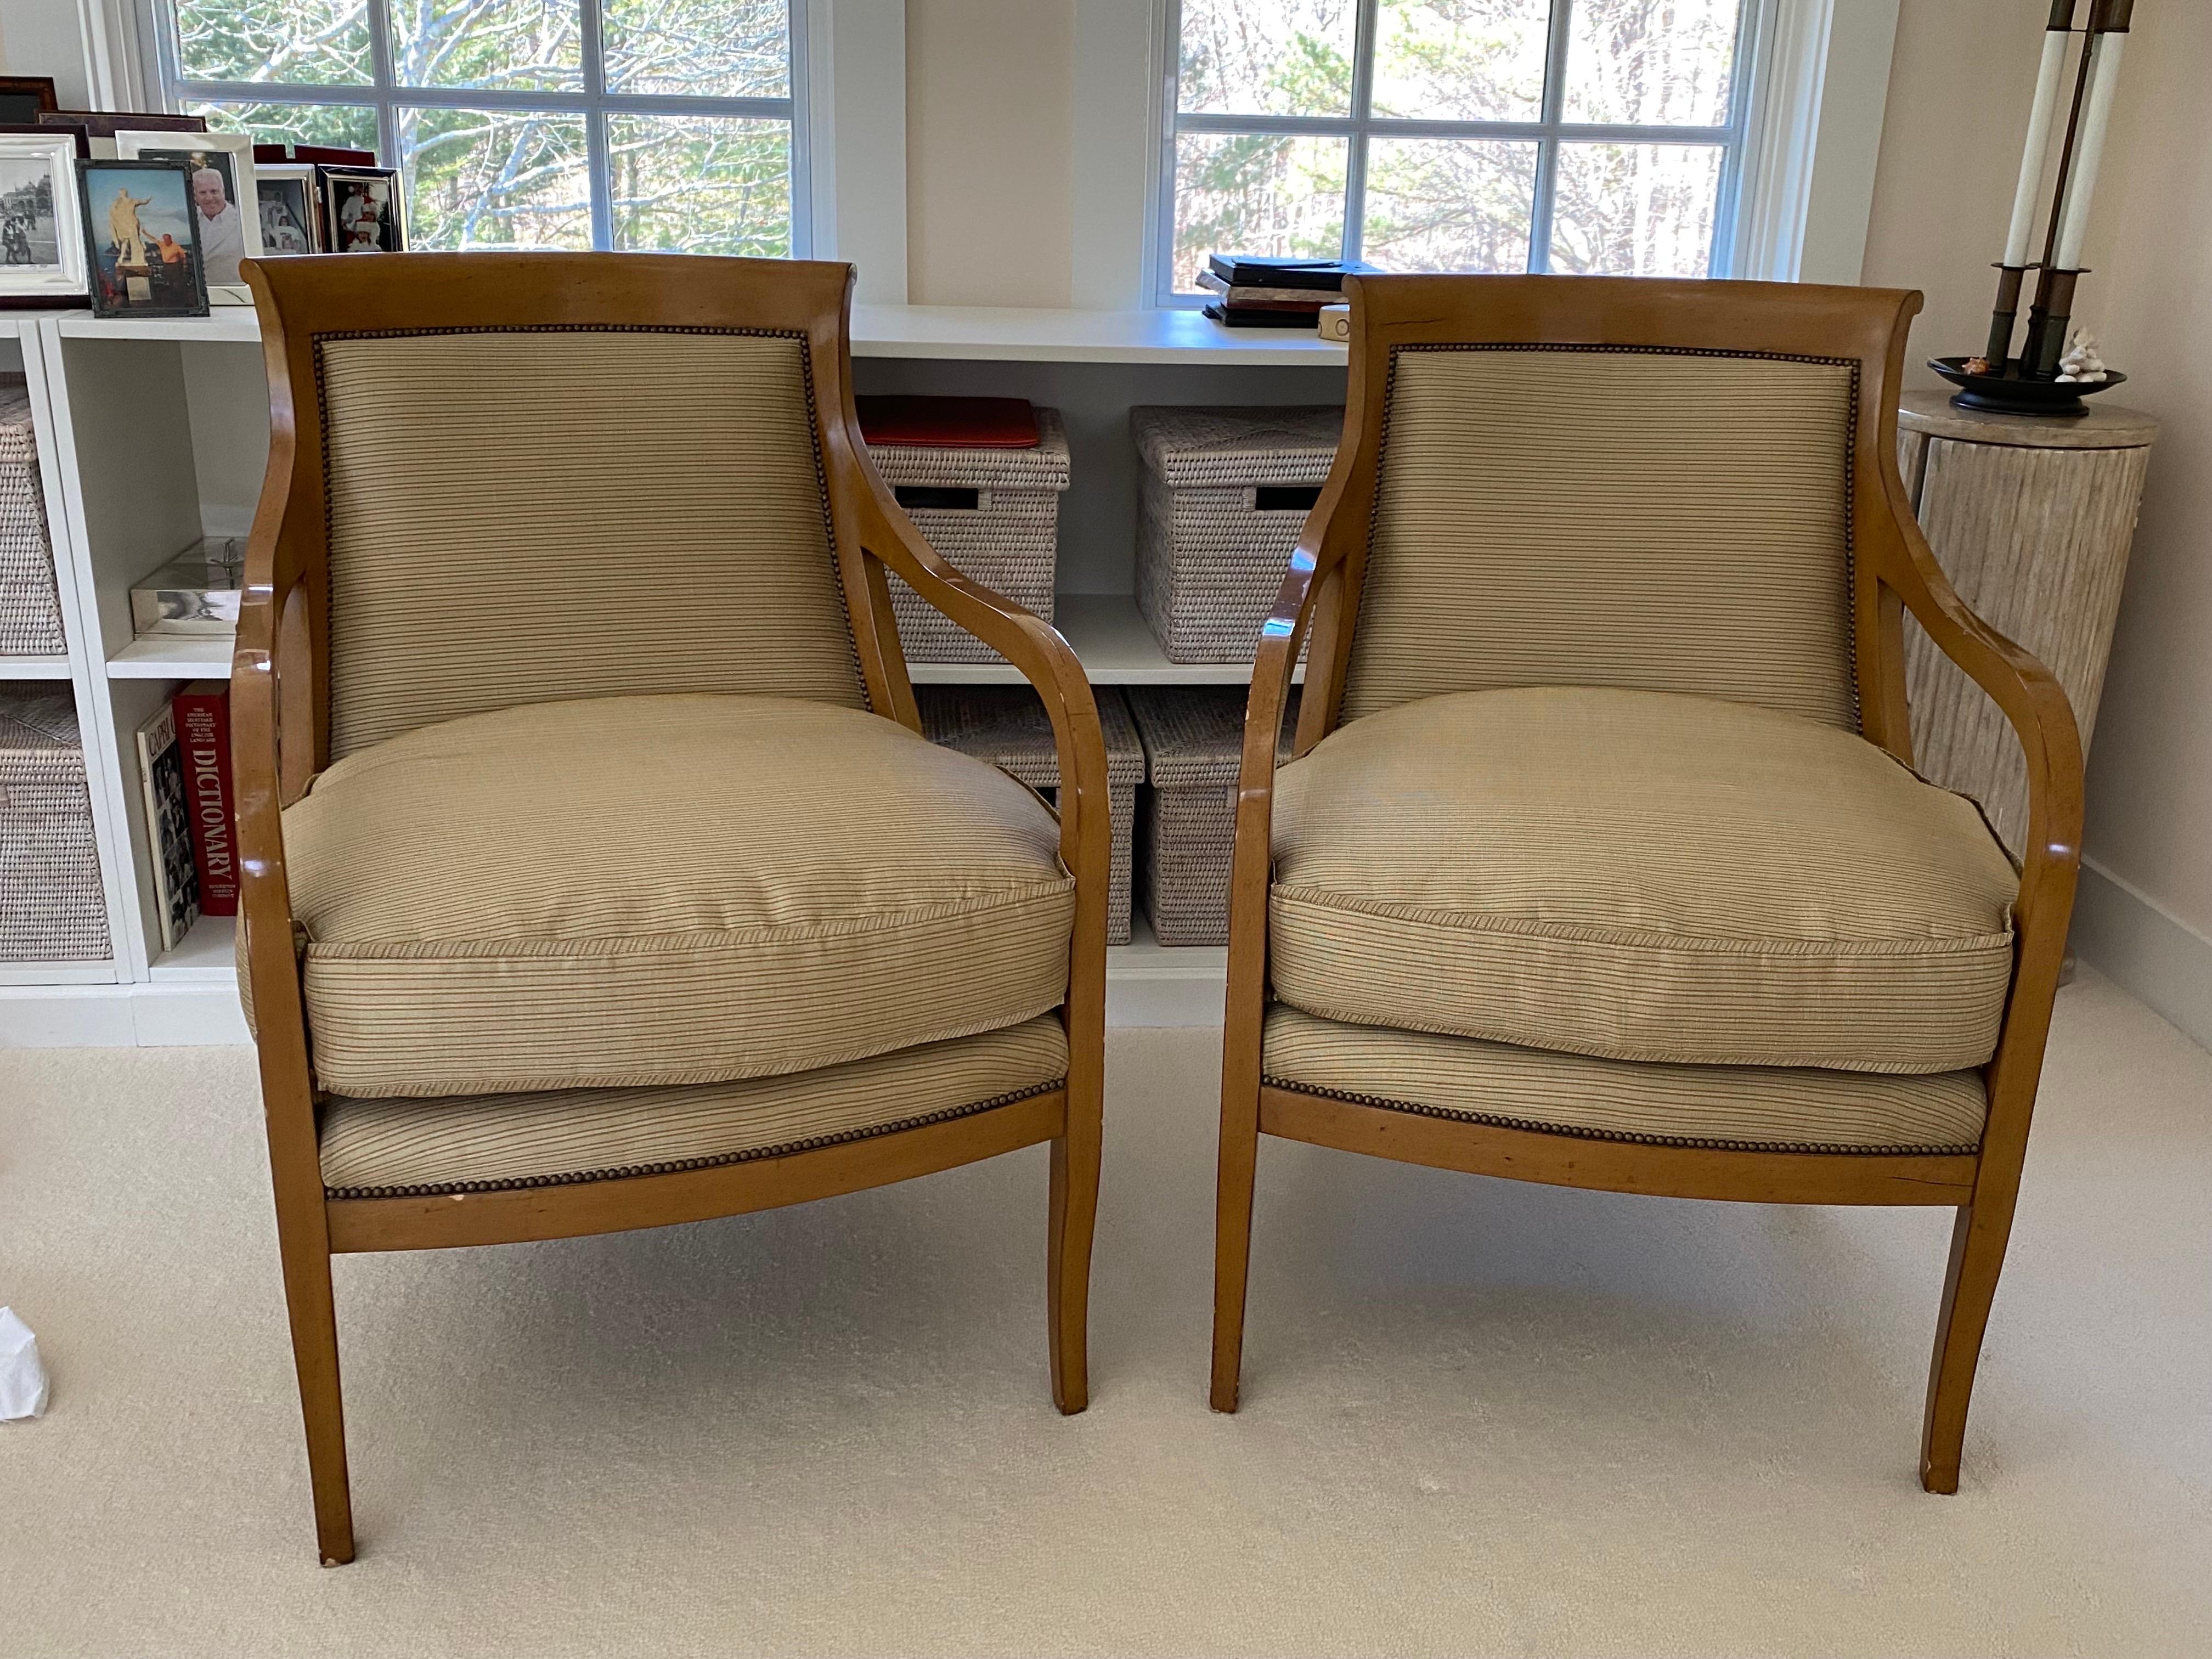 Pair of Nancy Corzine '2003 Napoleon Lounge' Chairs in Silk Fabric. 
Silk flange edging on cushion. Fabric in very good condition. Some dings and losses to legs and finish on frame. Structurally sound.

Measures: 25.25